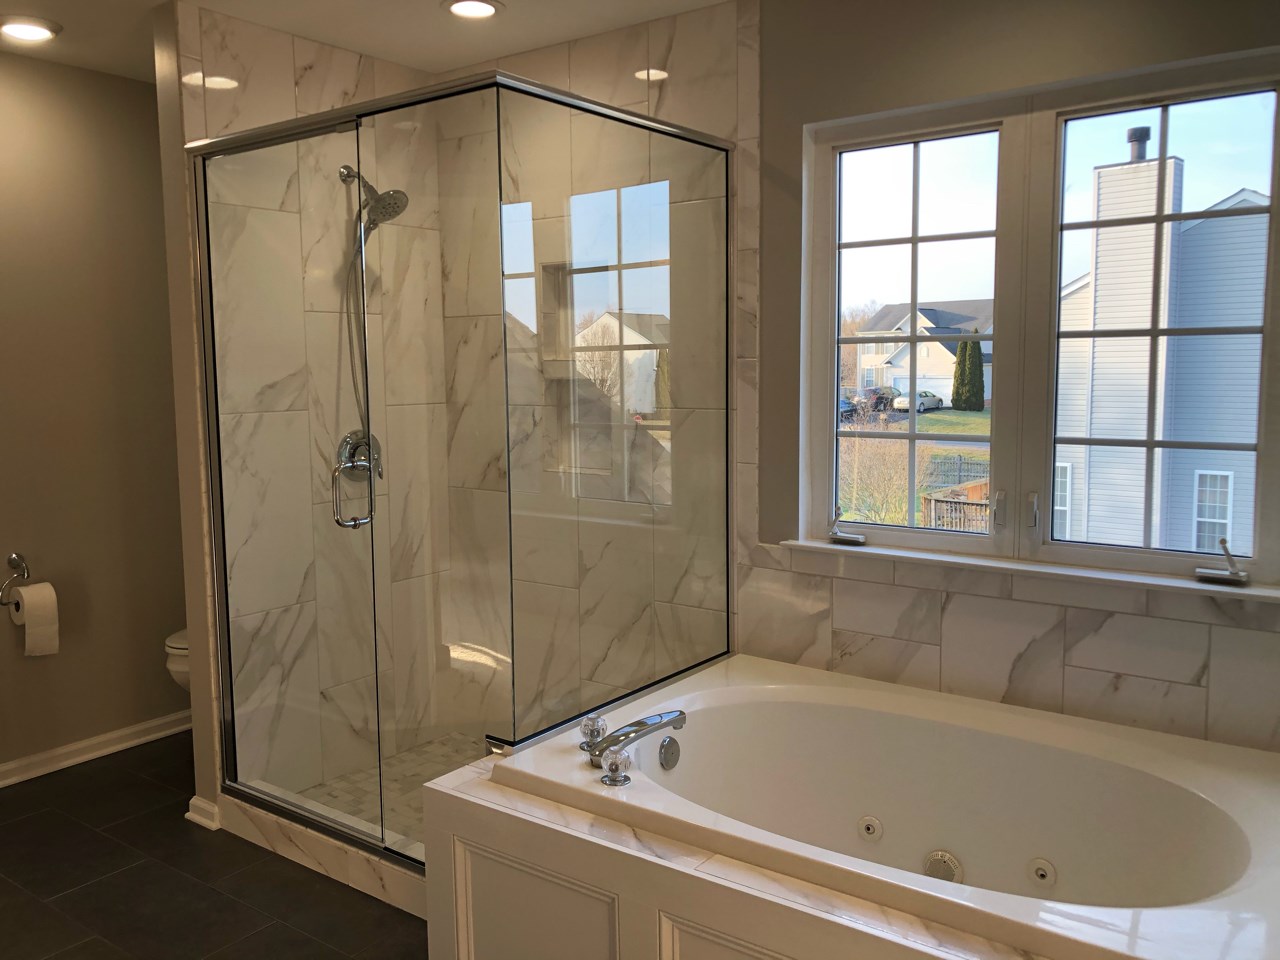 Bathrooms designed by Mountaineer Kitchens & Baths